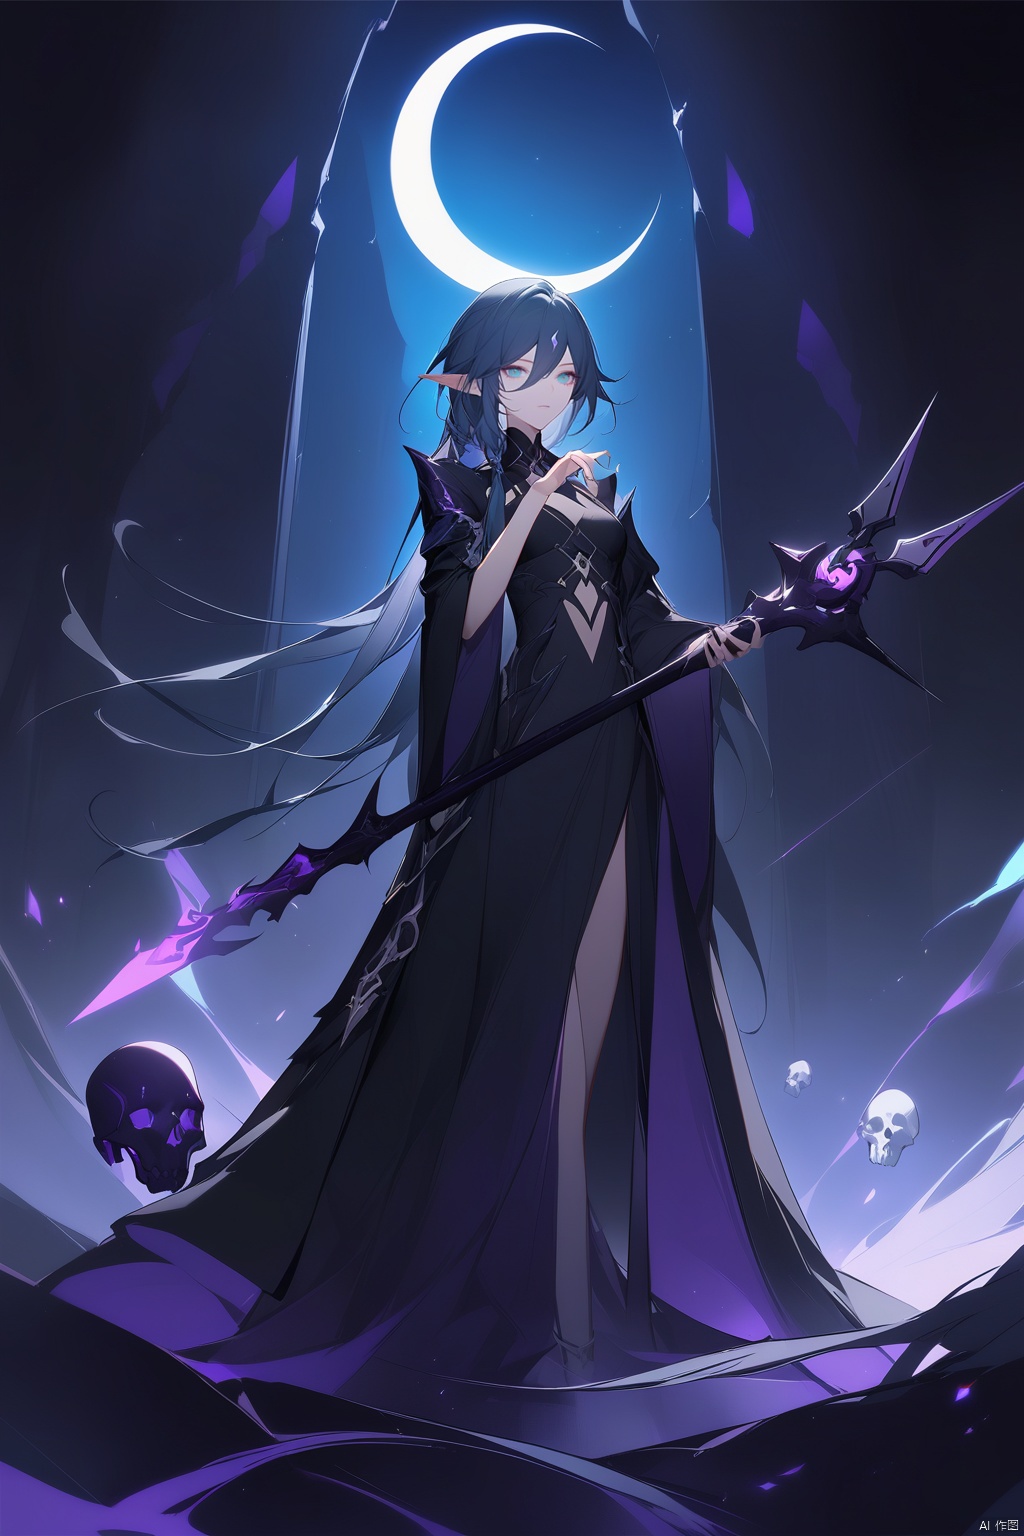  [[fu hua (phoenix)(honkai impact 3rd)]],nai3,1girl,solo,blue eyes
{artist:ask(askzy)}, 
1elf, female, dark sorceress, sinister yet alluring gaze, emerald green eyes, raven hair with silver streaks, pointed elven ears, ominous black mage robes adorned with mystical symbols and purple accents, holding a staff of skulls emitting dark energy, standing in an ancient elven ruin, crescent moon above, spectral wolf by her side, wearing dark leather armor under the robes, intricate runic tattoos on exposed skin, spellcasting gesture, ethereal dark aura, half-hidden face mask made of bone

